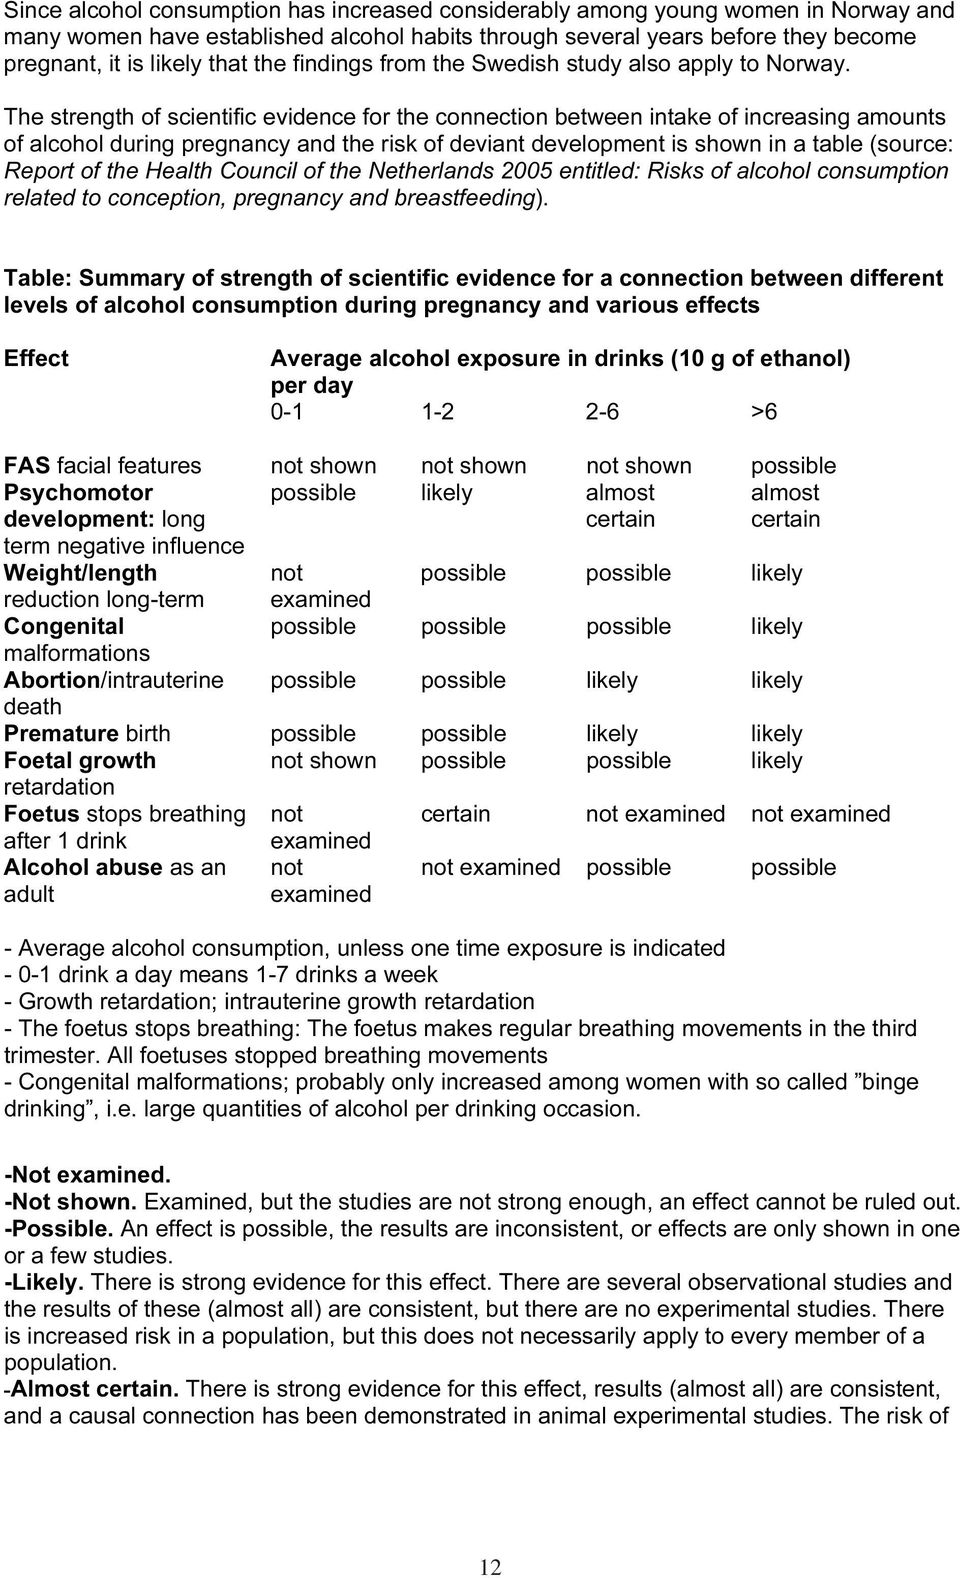 The strength of scientific evidence for the connection between intake of increasing amounts of alcohol during pregnancy and the risk of deviant development is shown in a table (source: Report of the